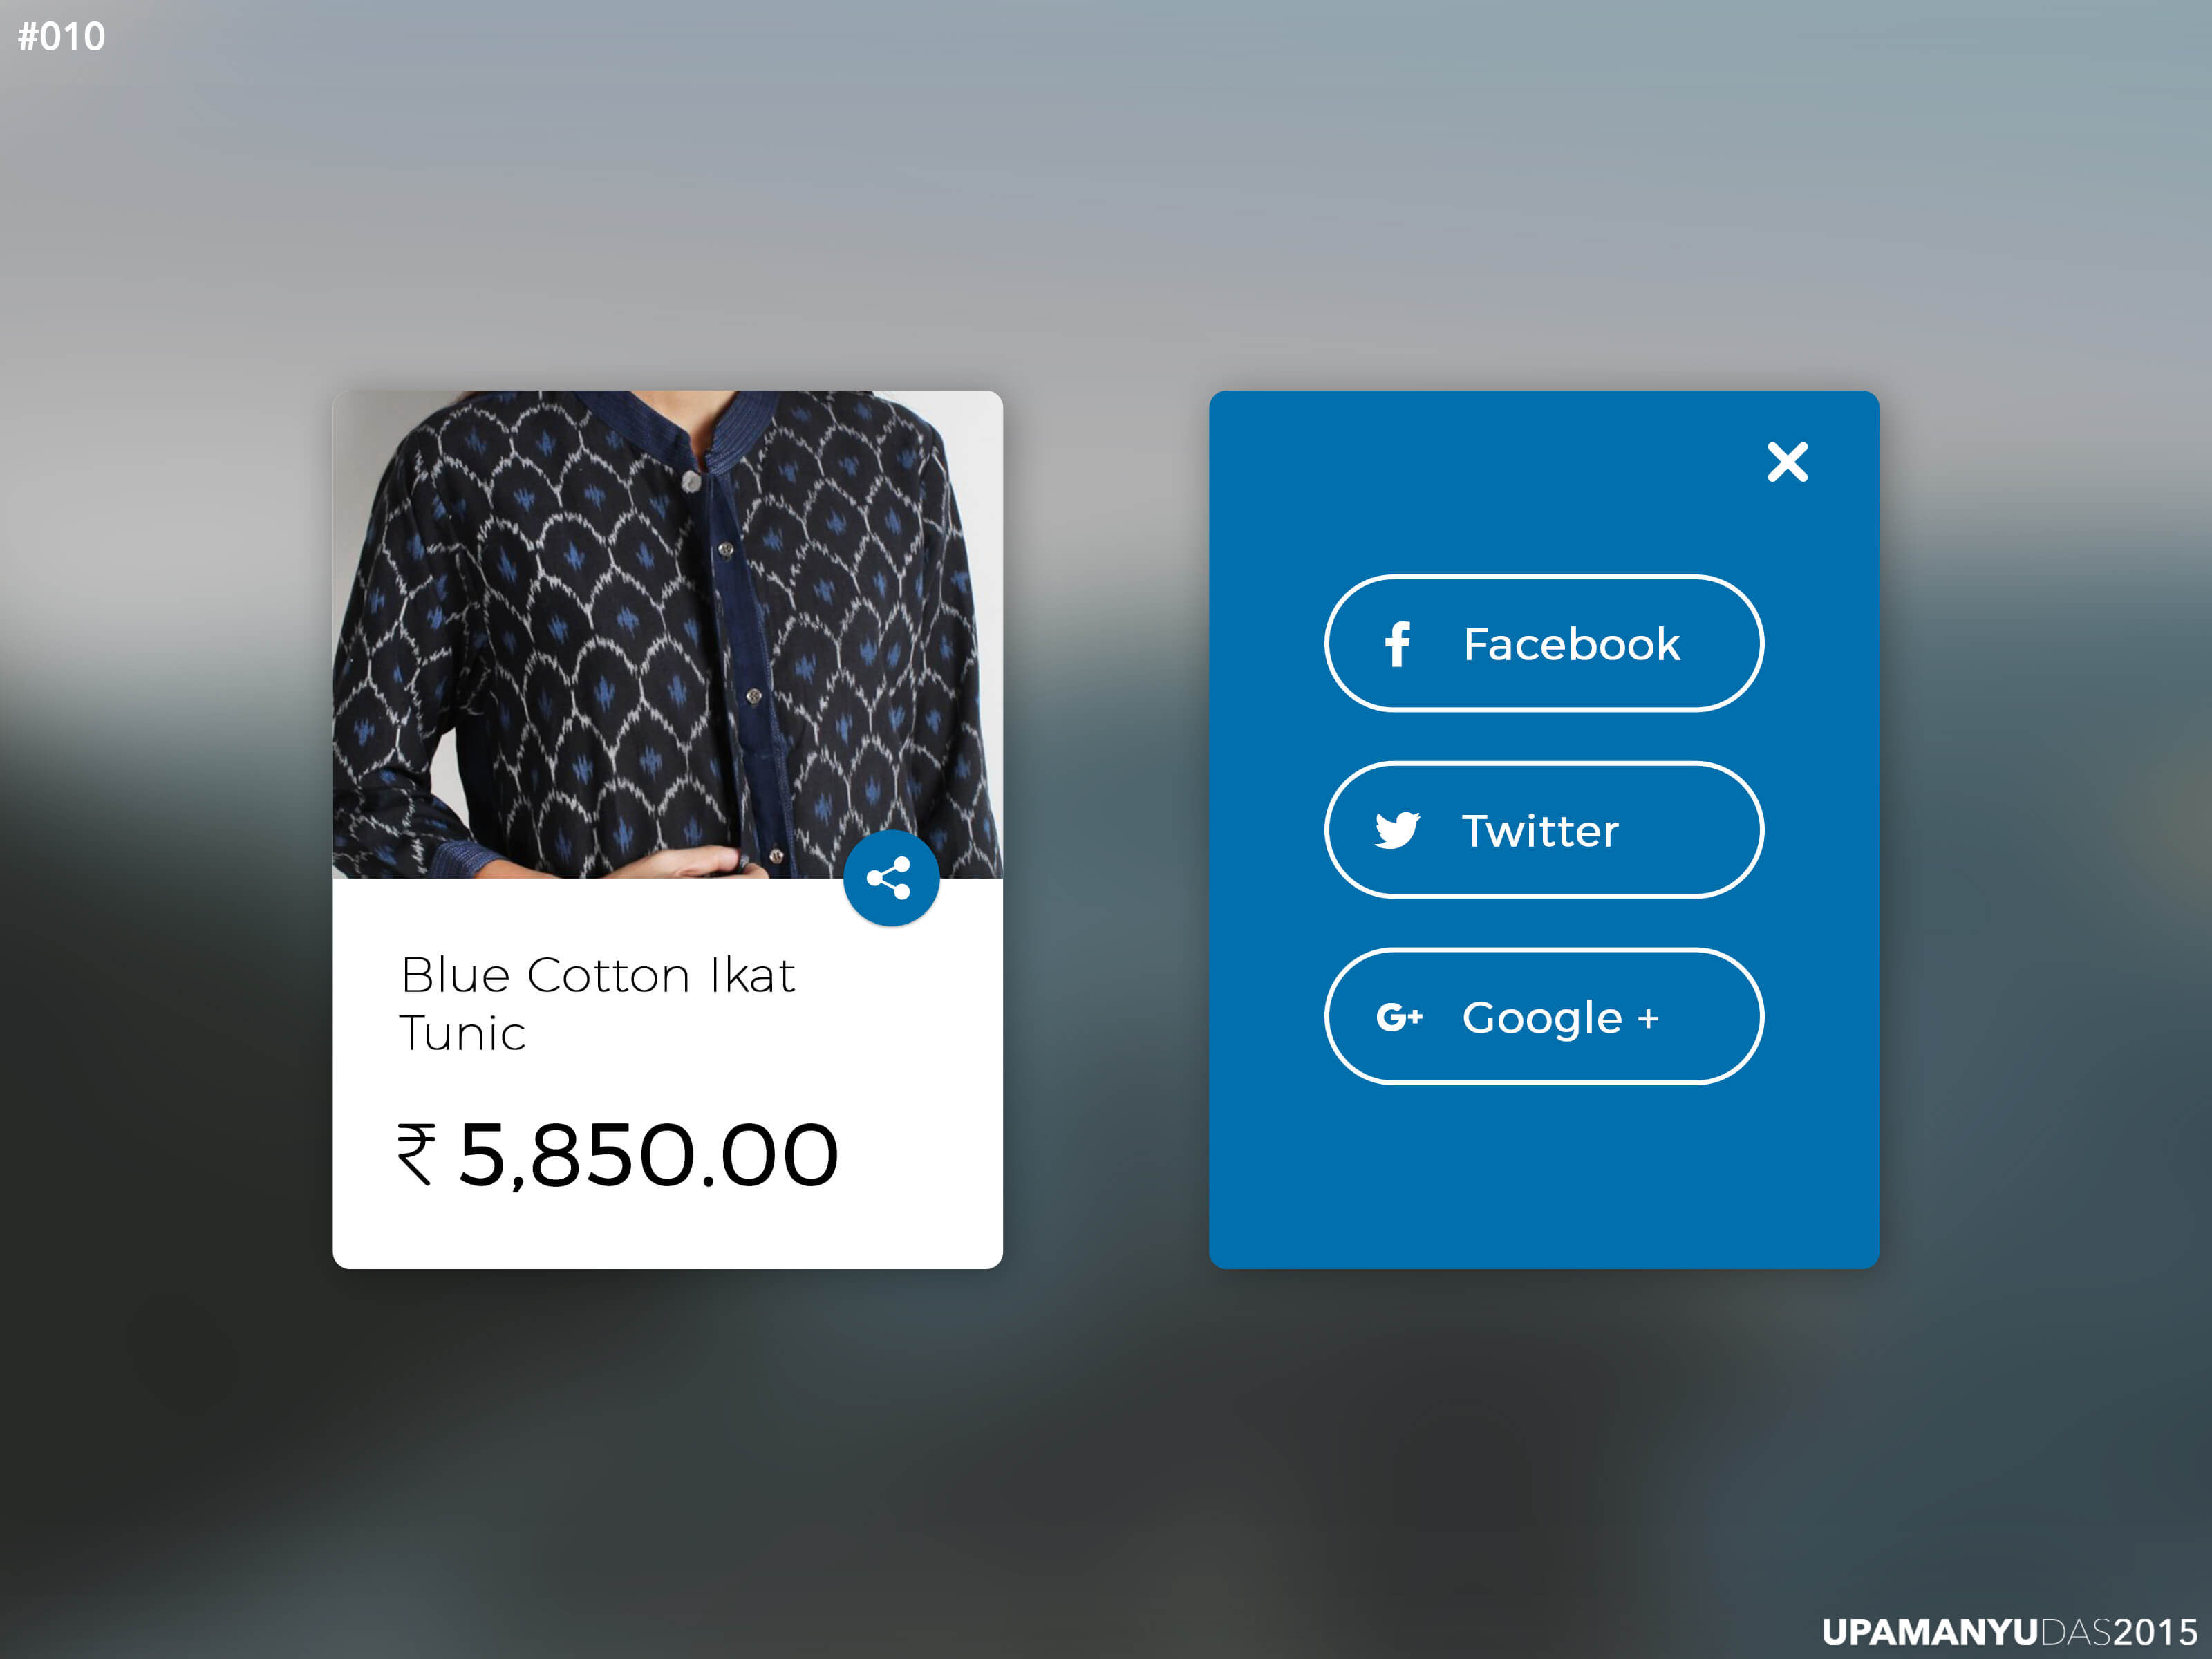 Daily UI Challenge, Day 010 - Social Share